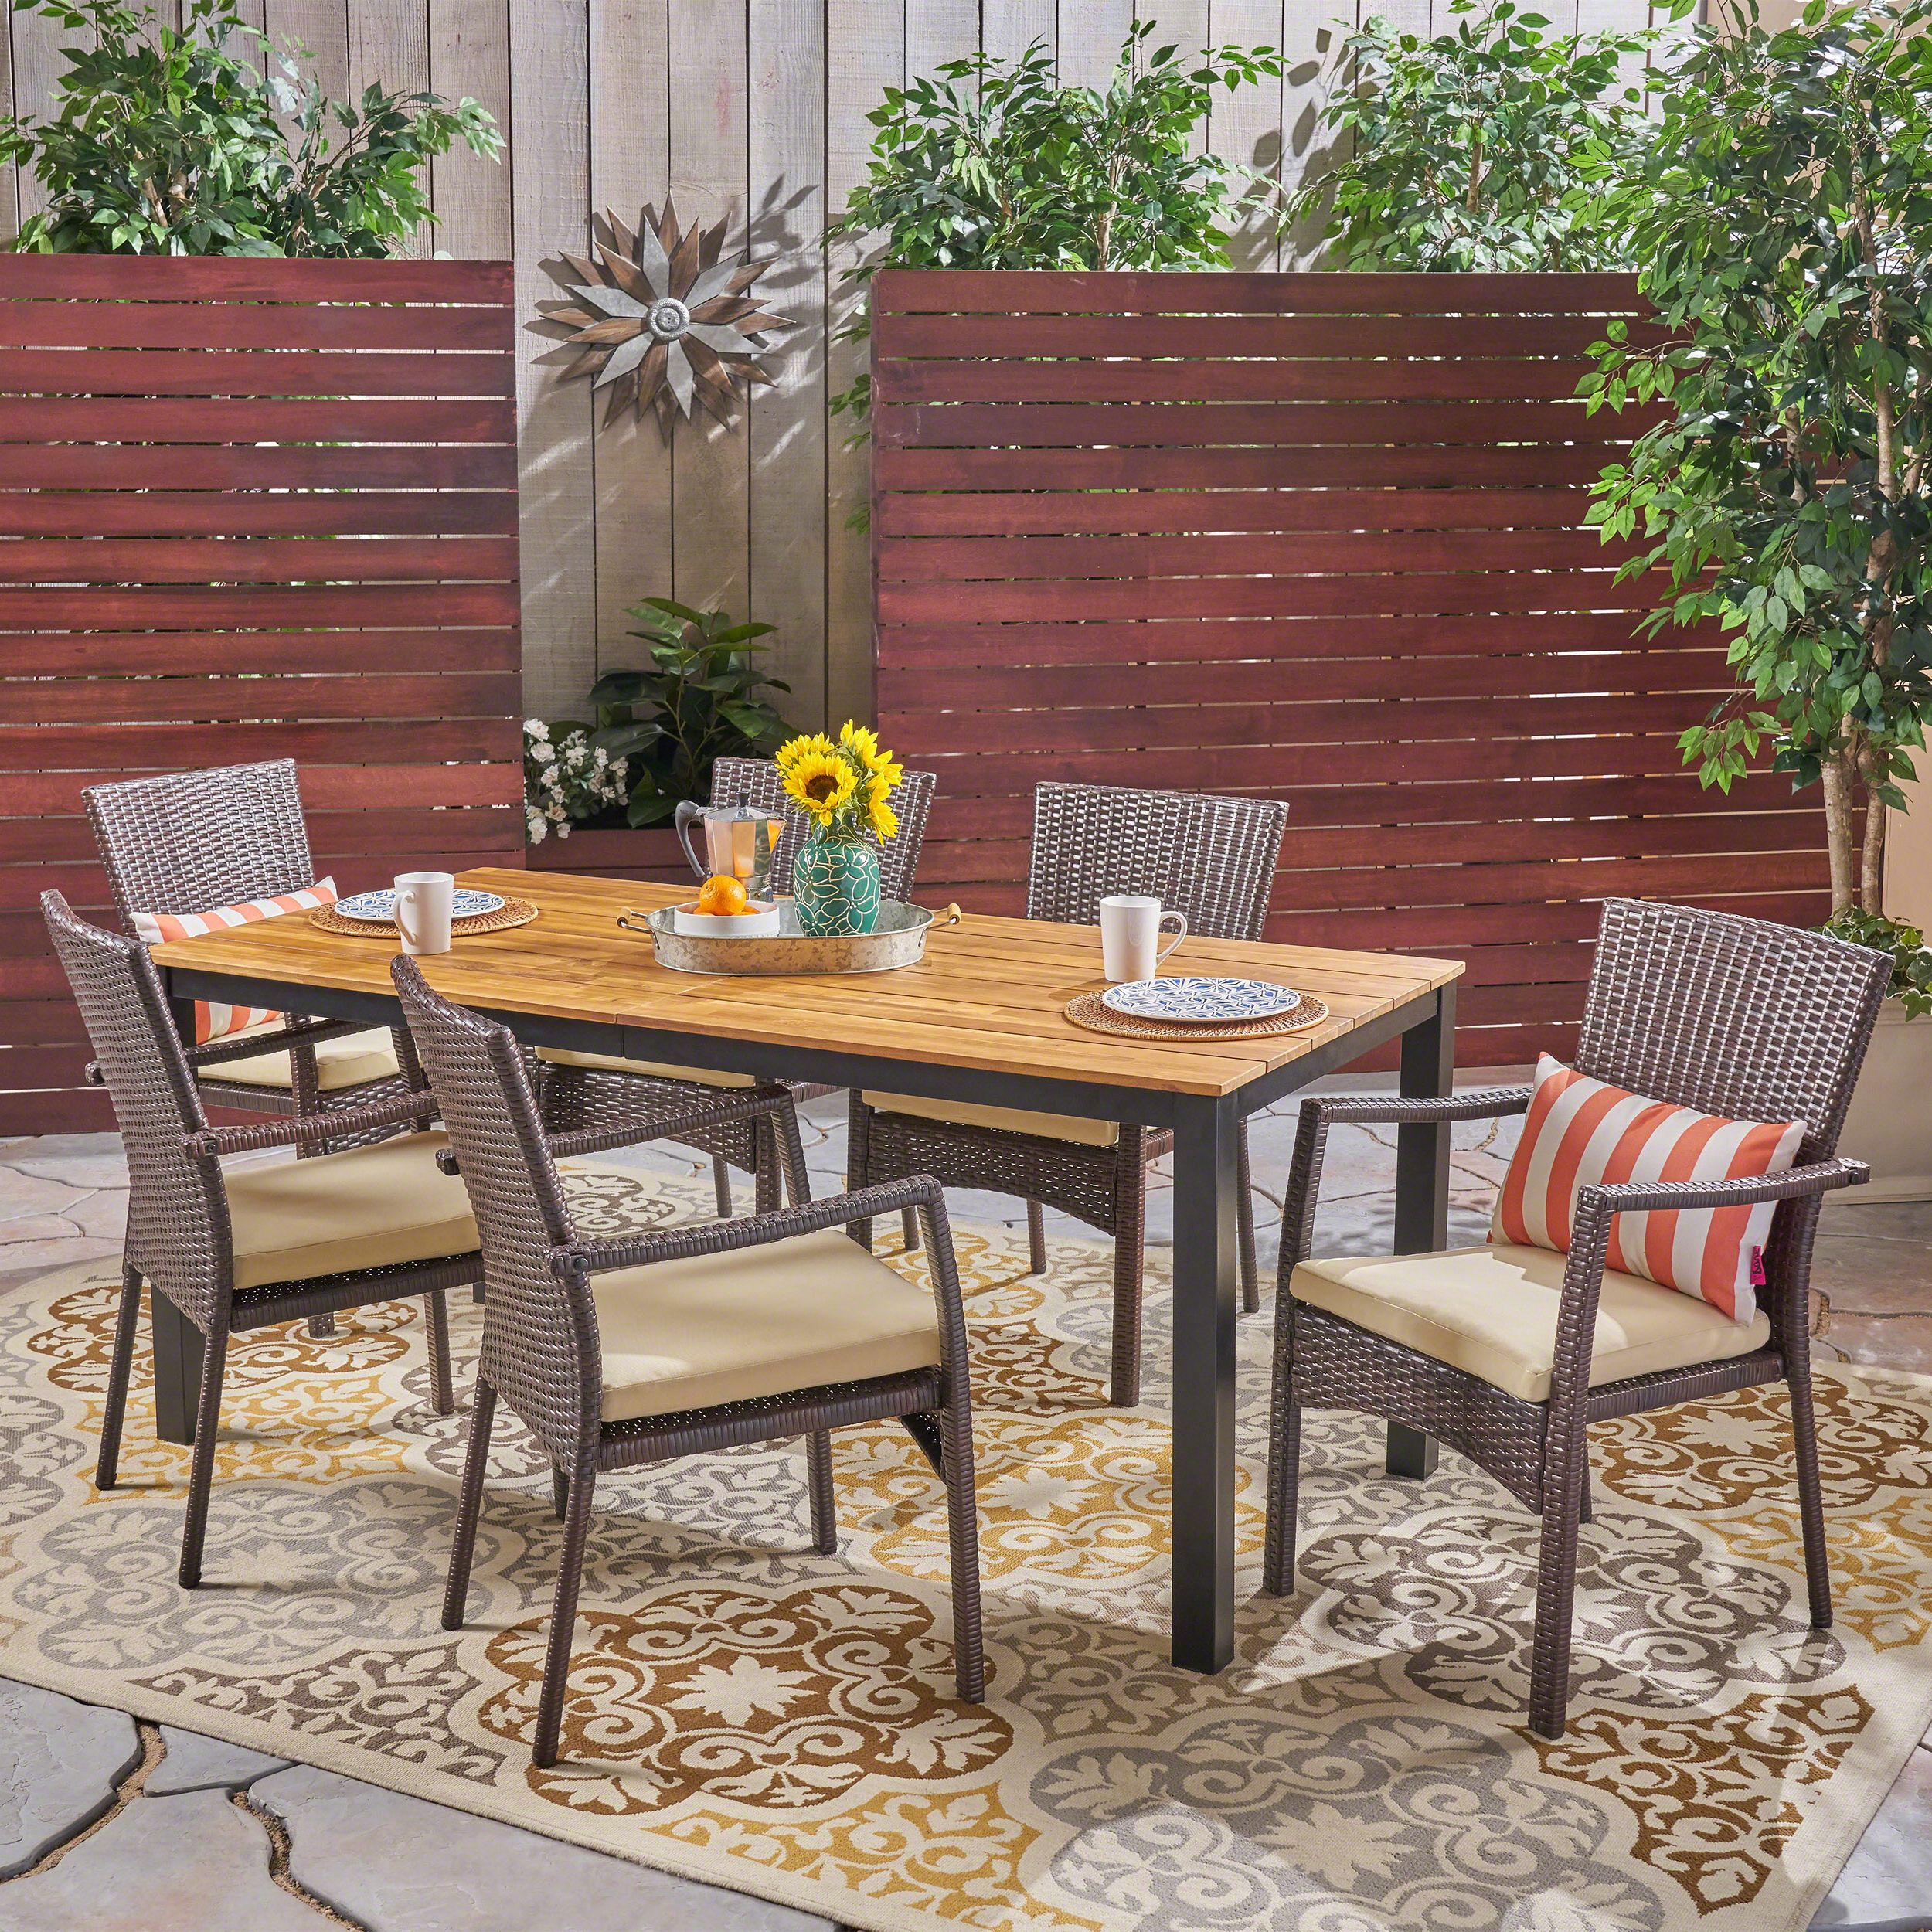 Well Liked Teak And Wicker Dining Sets Throughout Kenia Outdoor 7 Piece Acacia Wood Dining Set With Wicker Chairs, Brown (View 1 of 15)